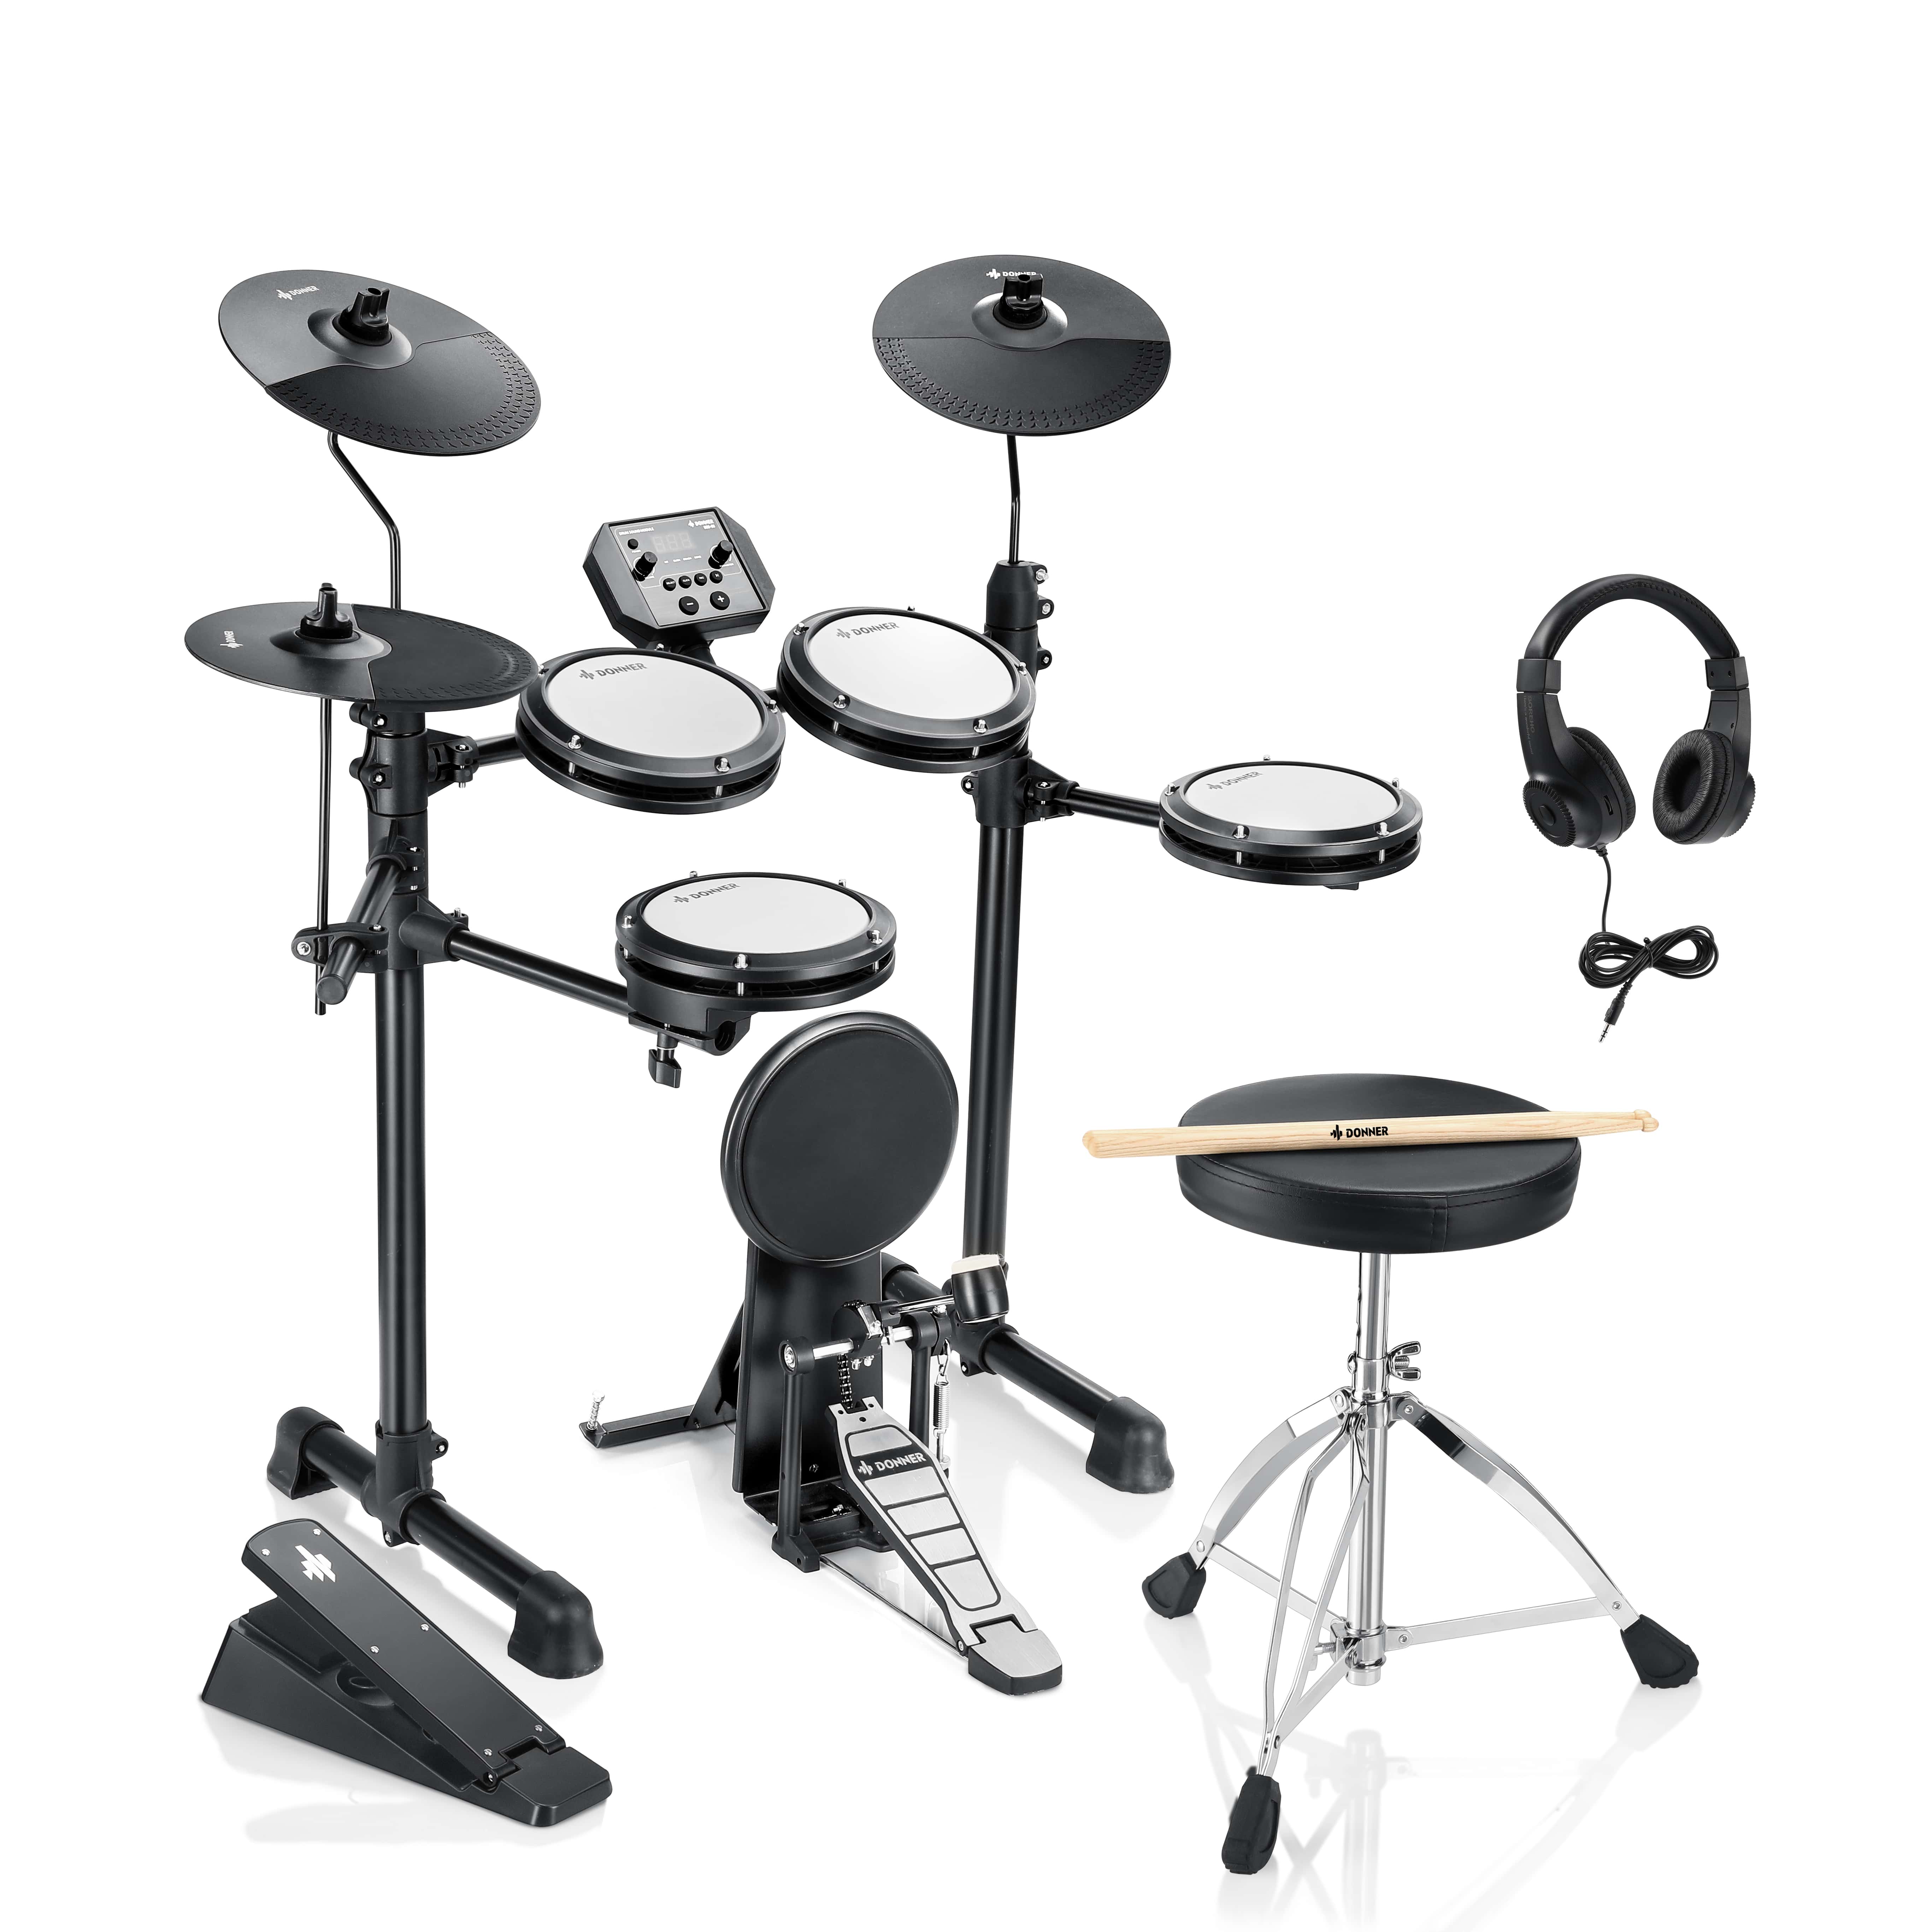 DONNERDED-80P5Drums3Cymbals